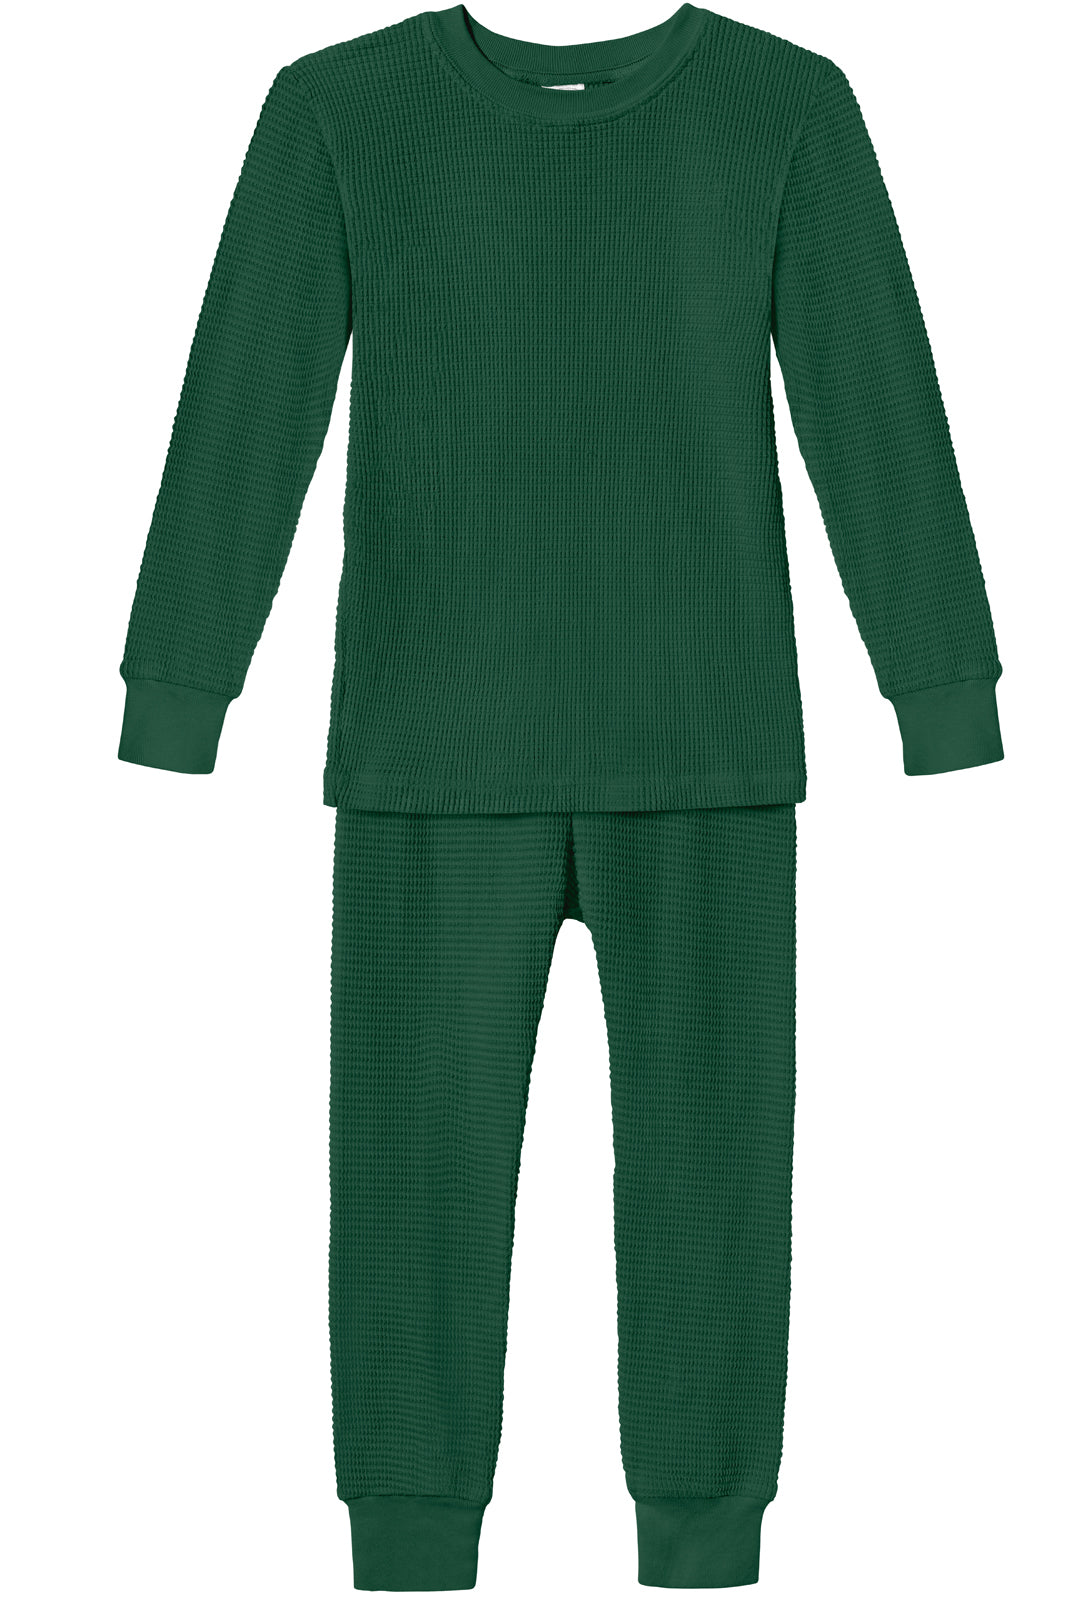 Boys and Girls 100% Cotton Soft & Warm Heavier Thermal Long John Set |  Forest Green